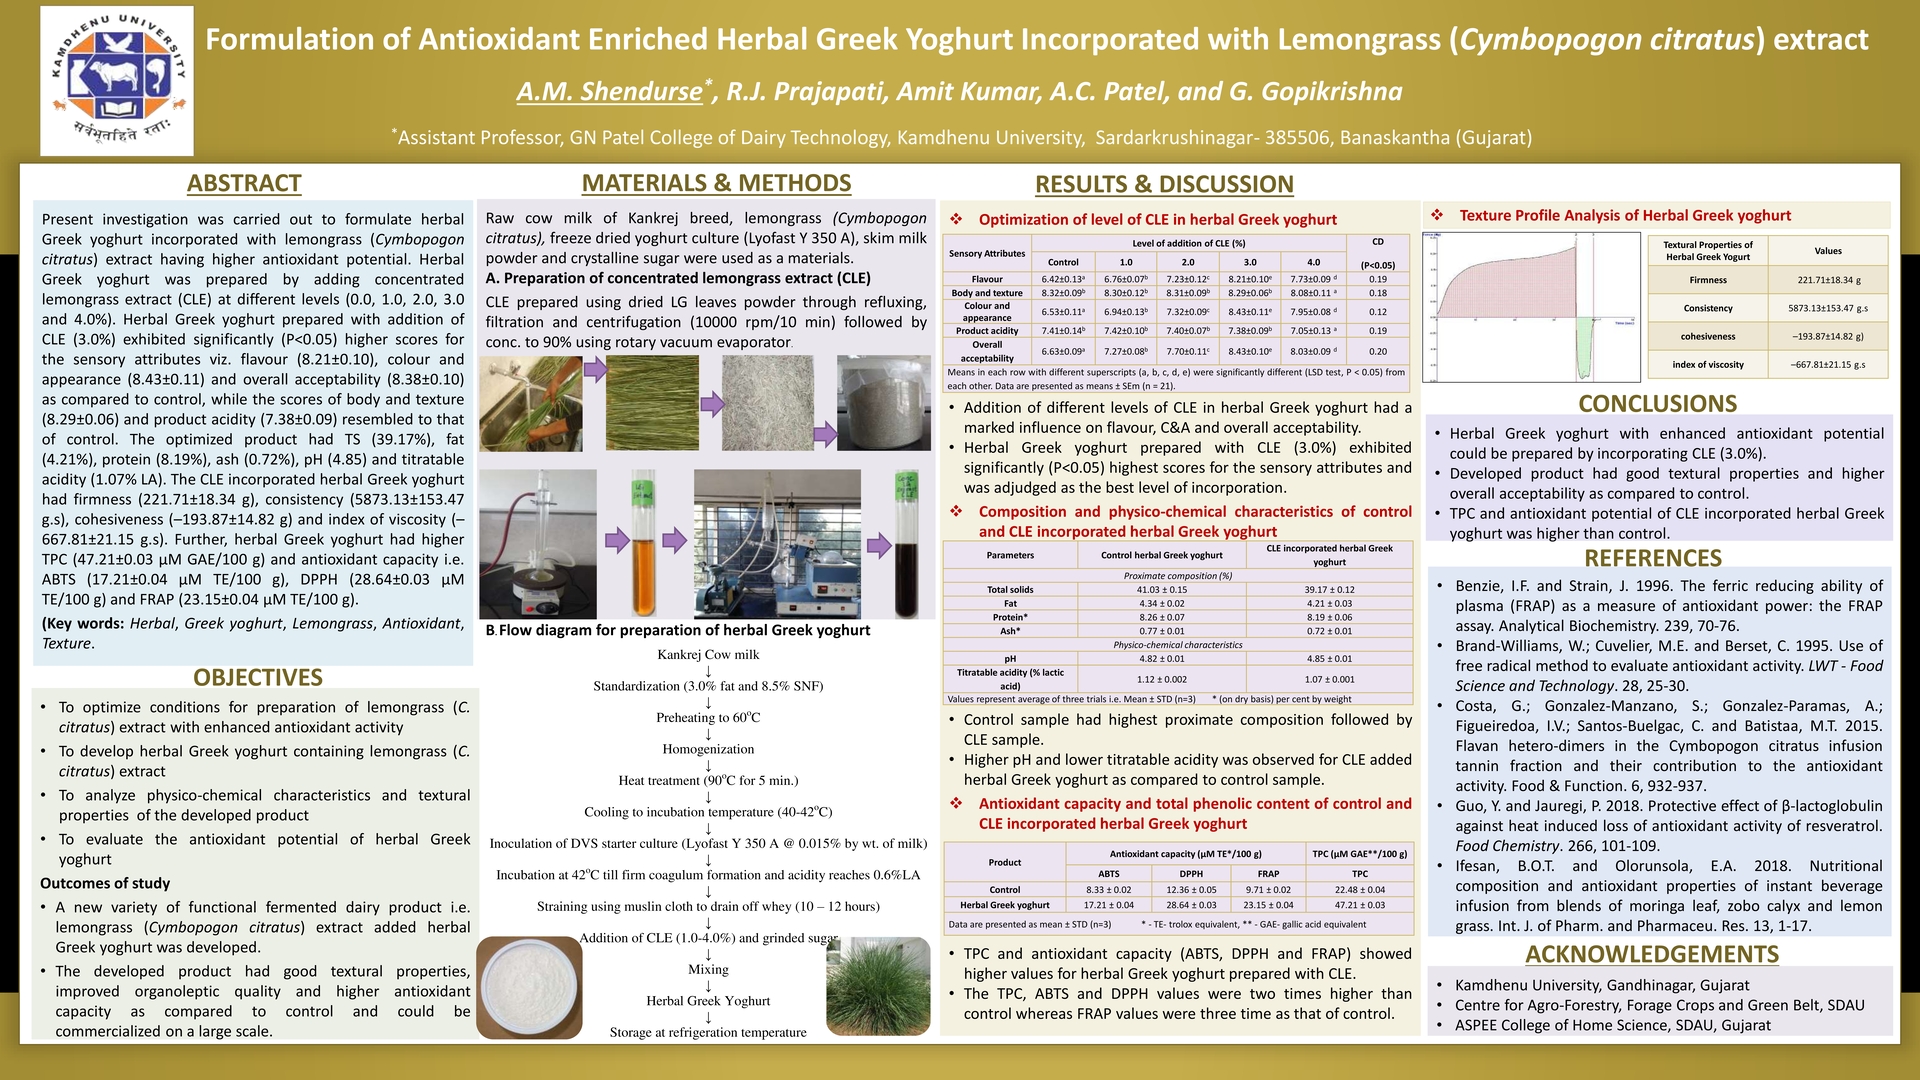 Formulation of Antioxidant Enriched Herbal Greek Yoghurt Incorporated with Lemongrass extract